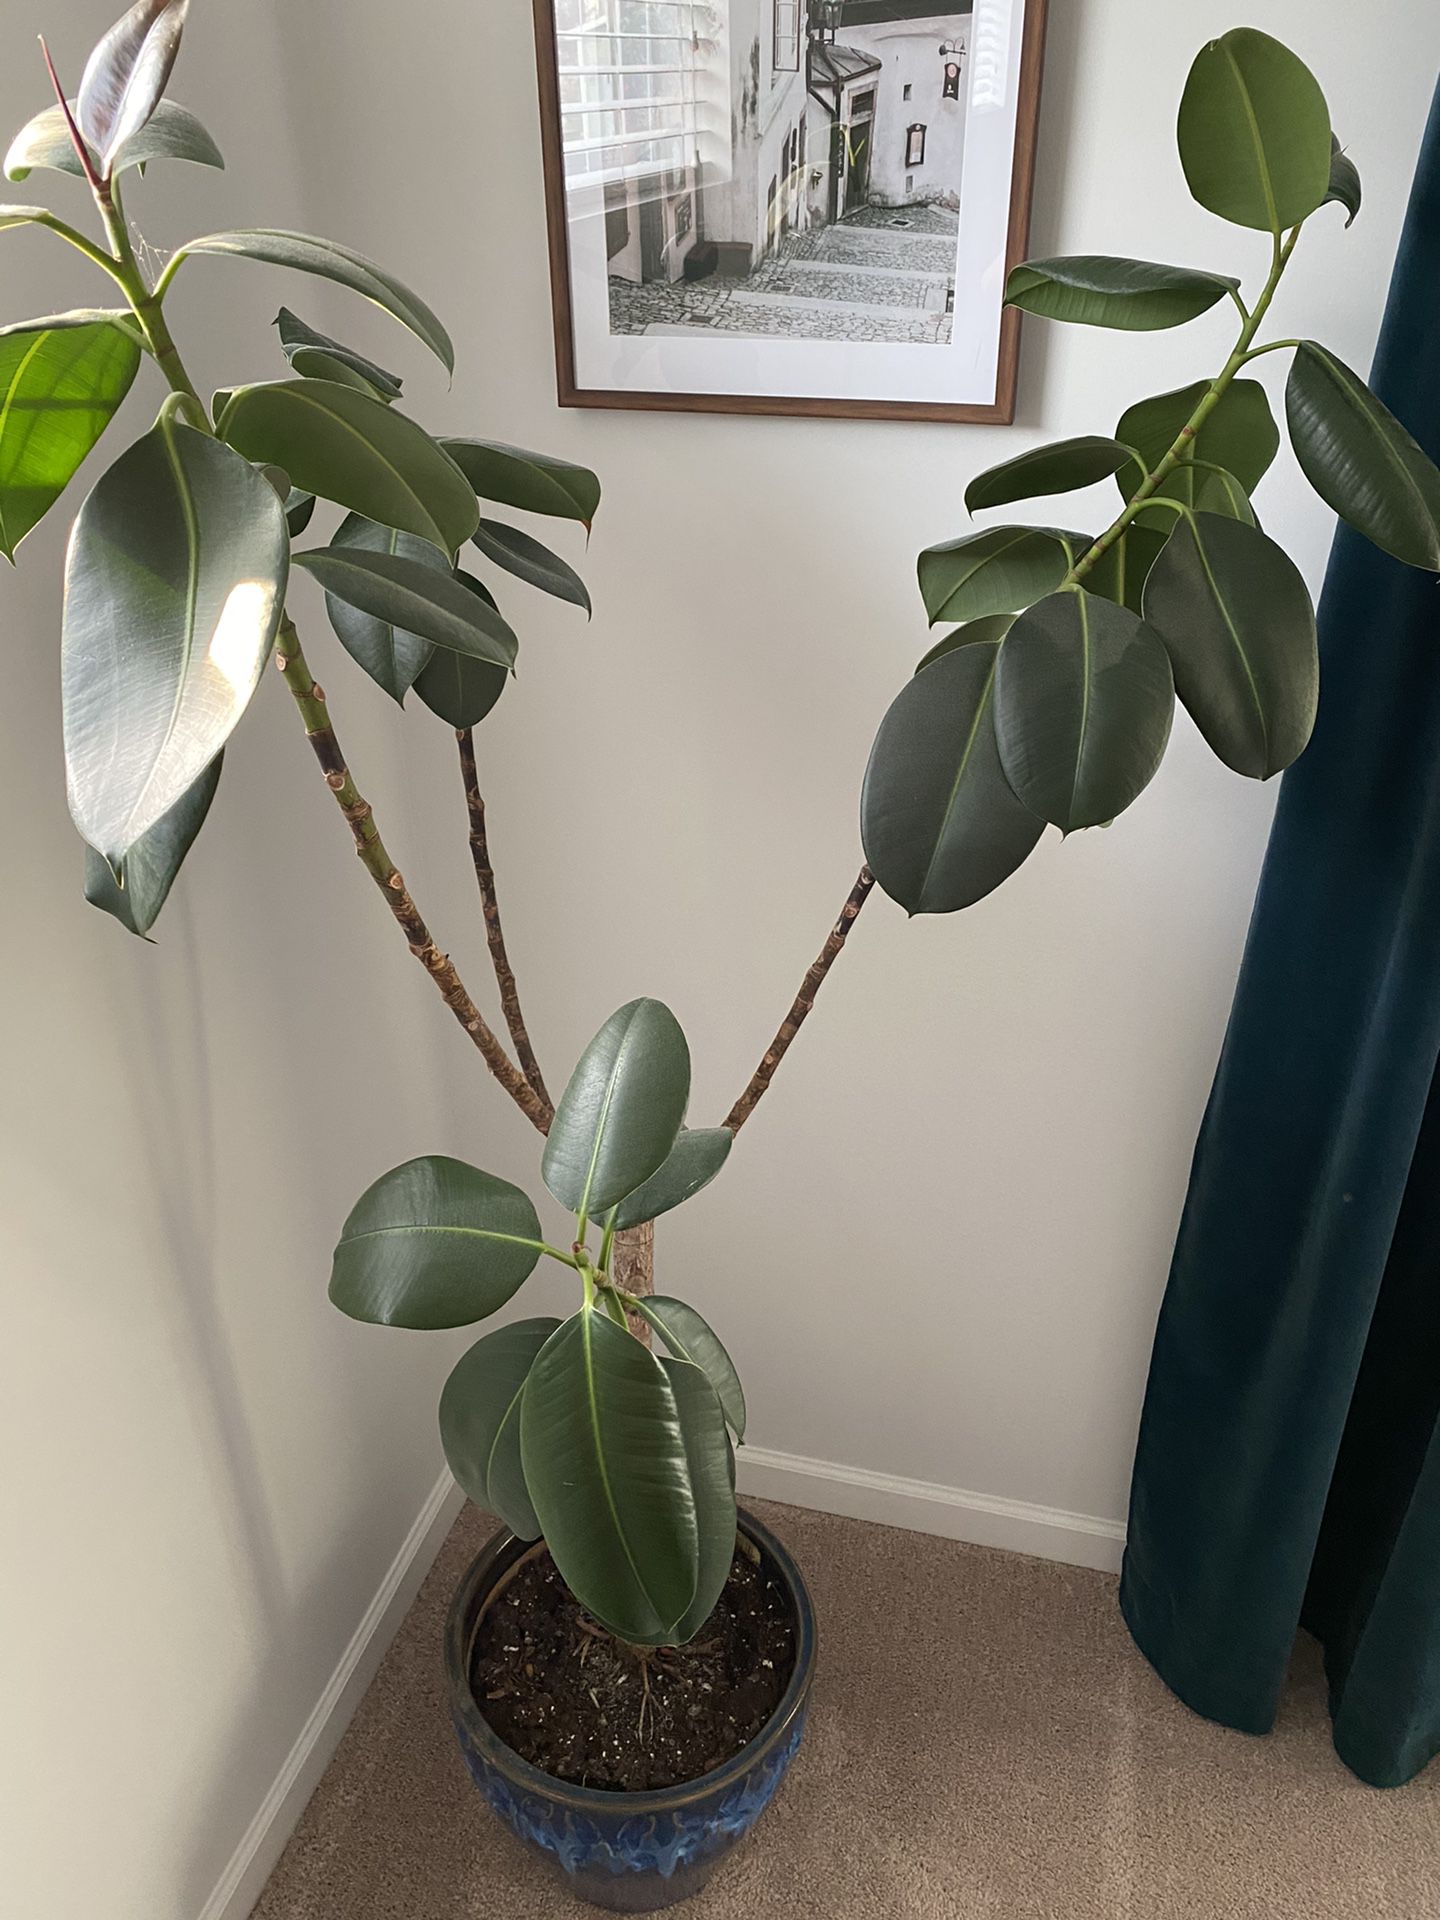 2 Large (real) Rubber Tree Plants